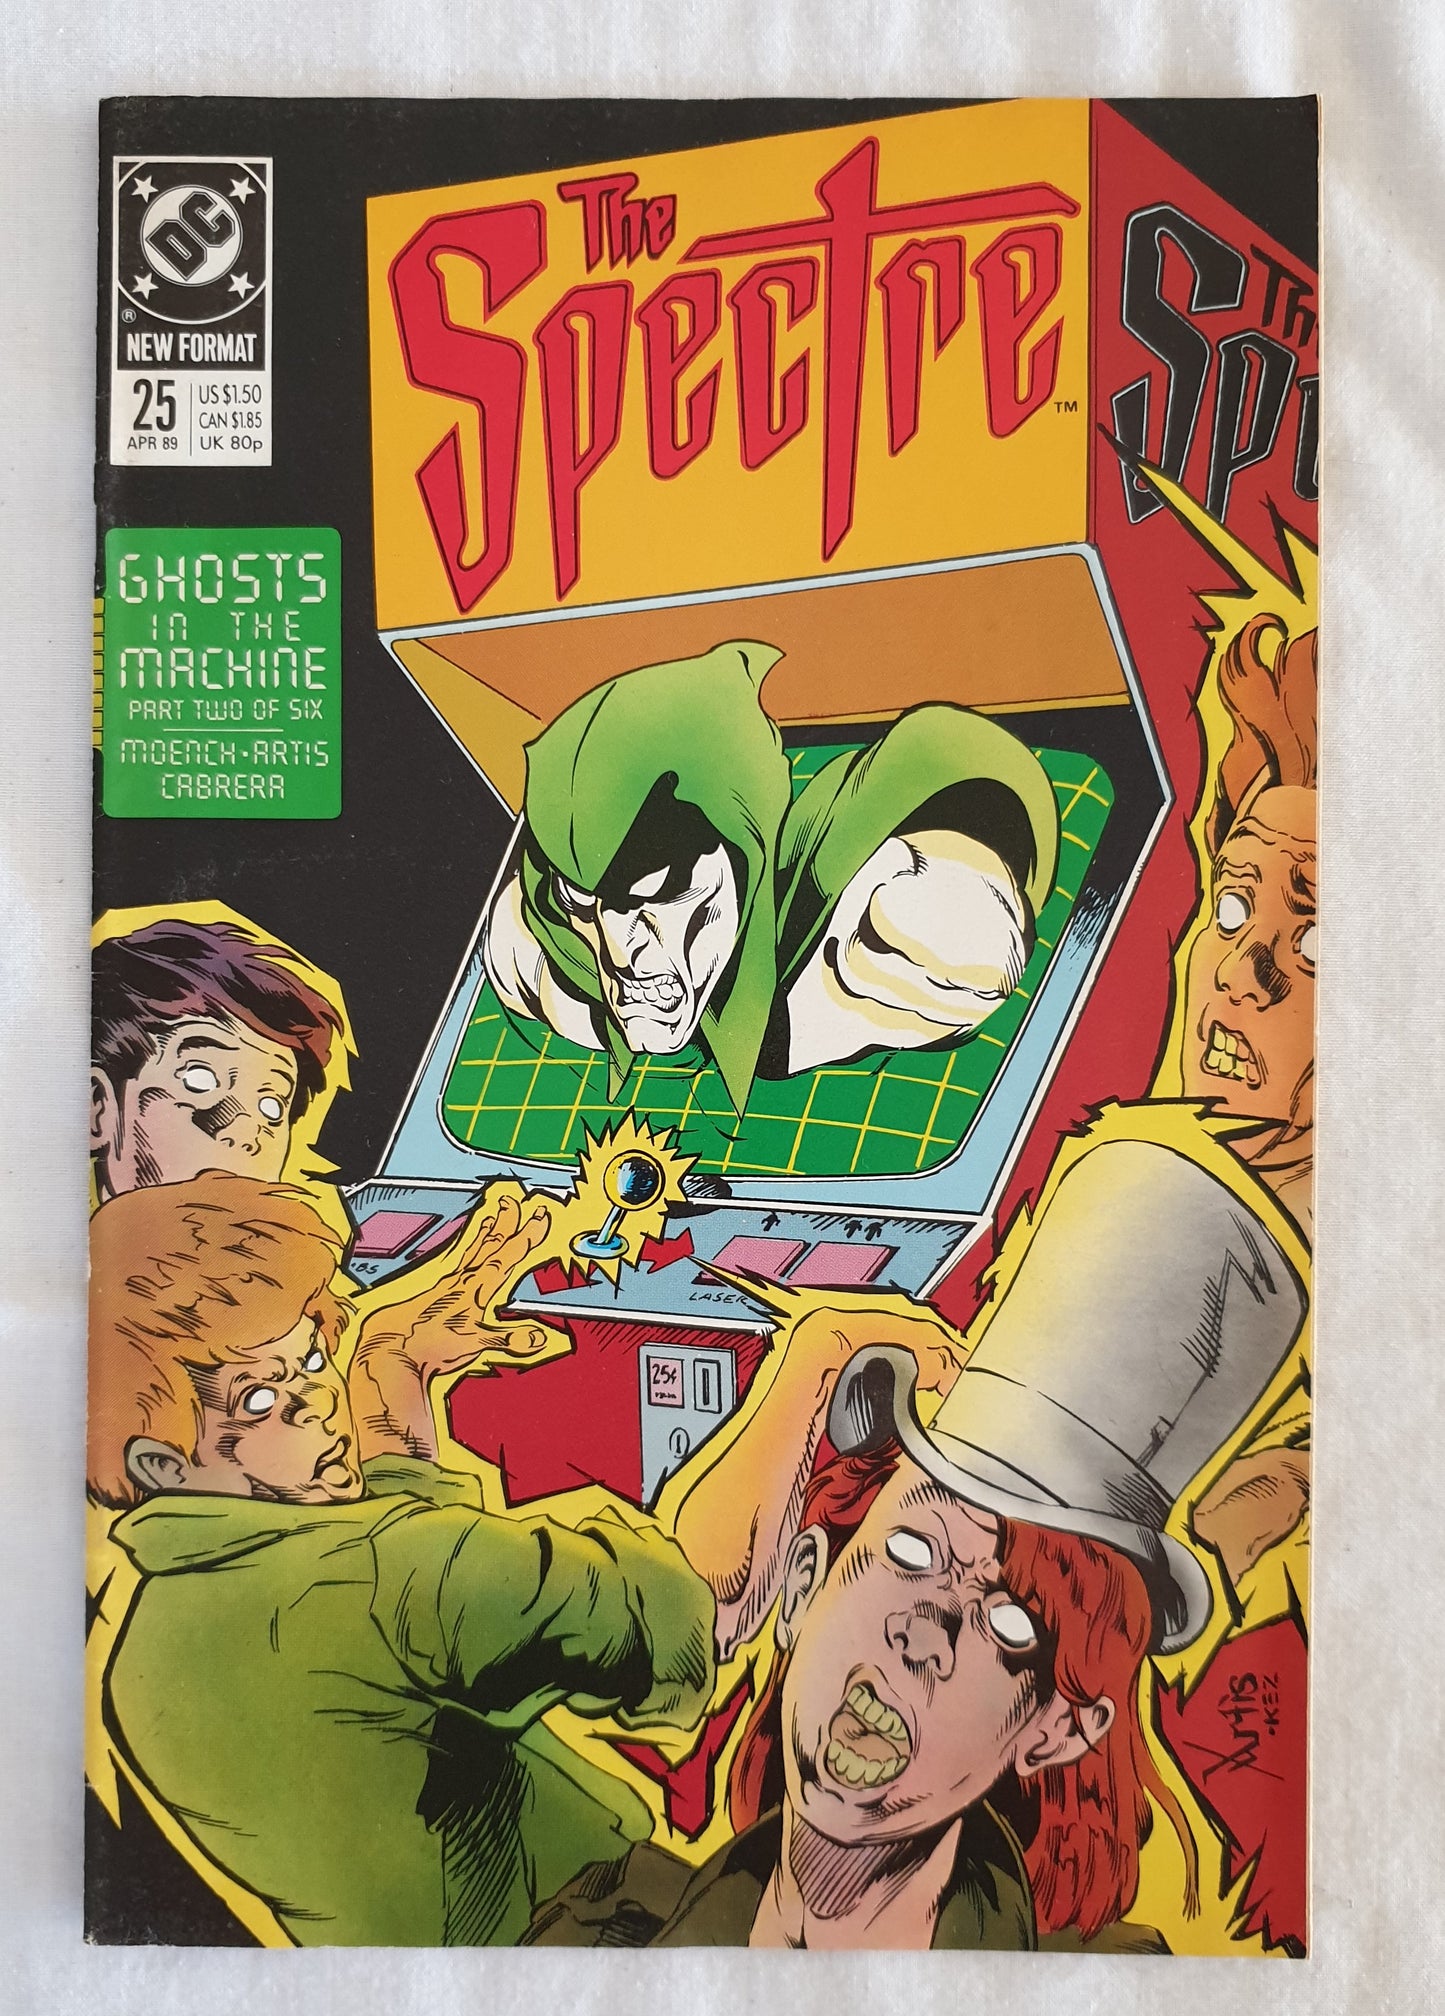 The Spectre #25 by DC Comics